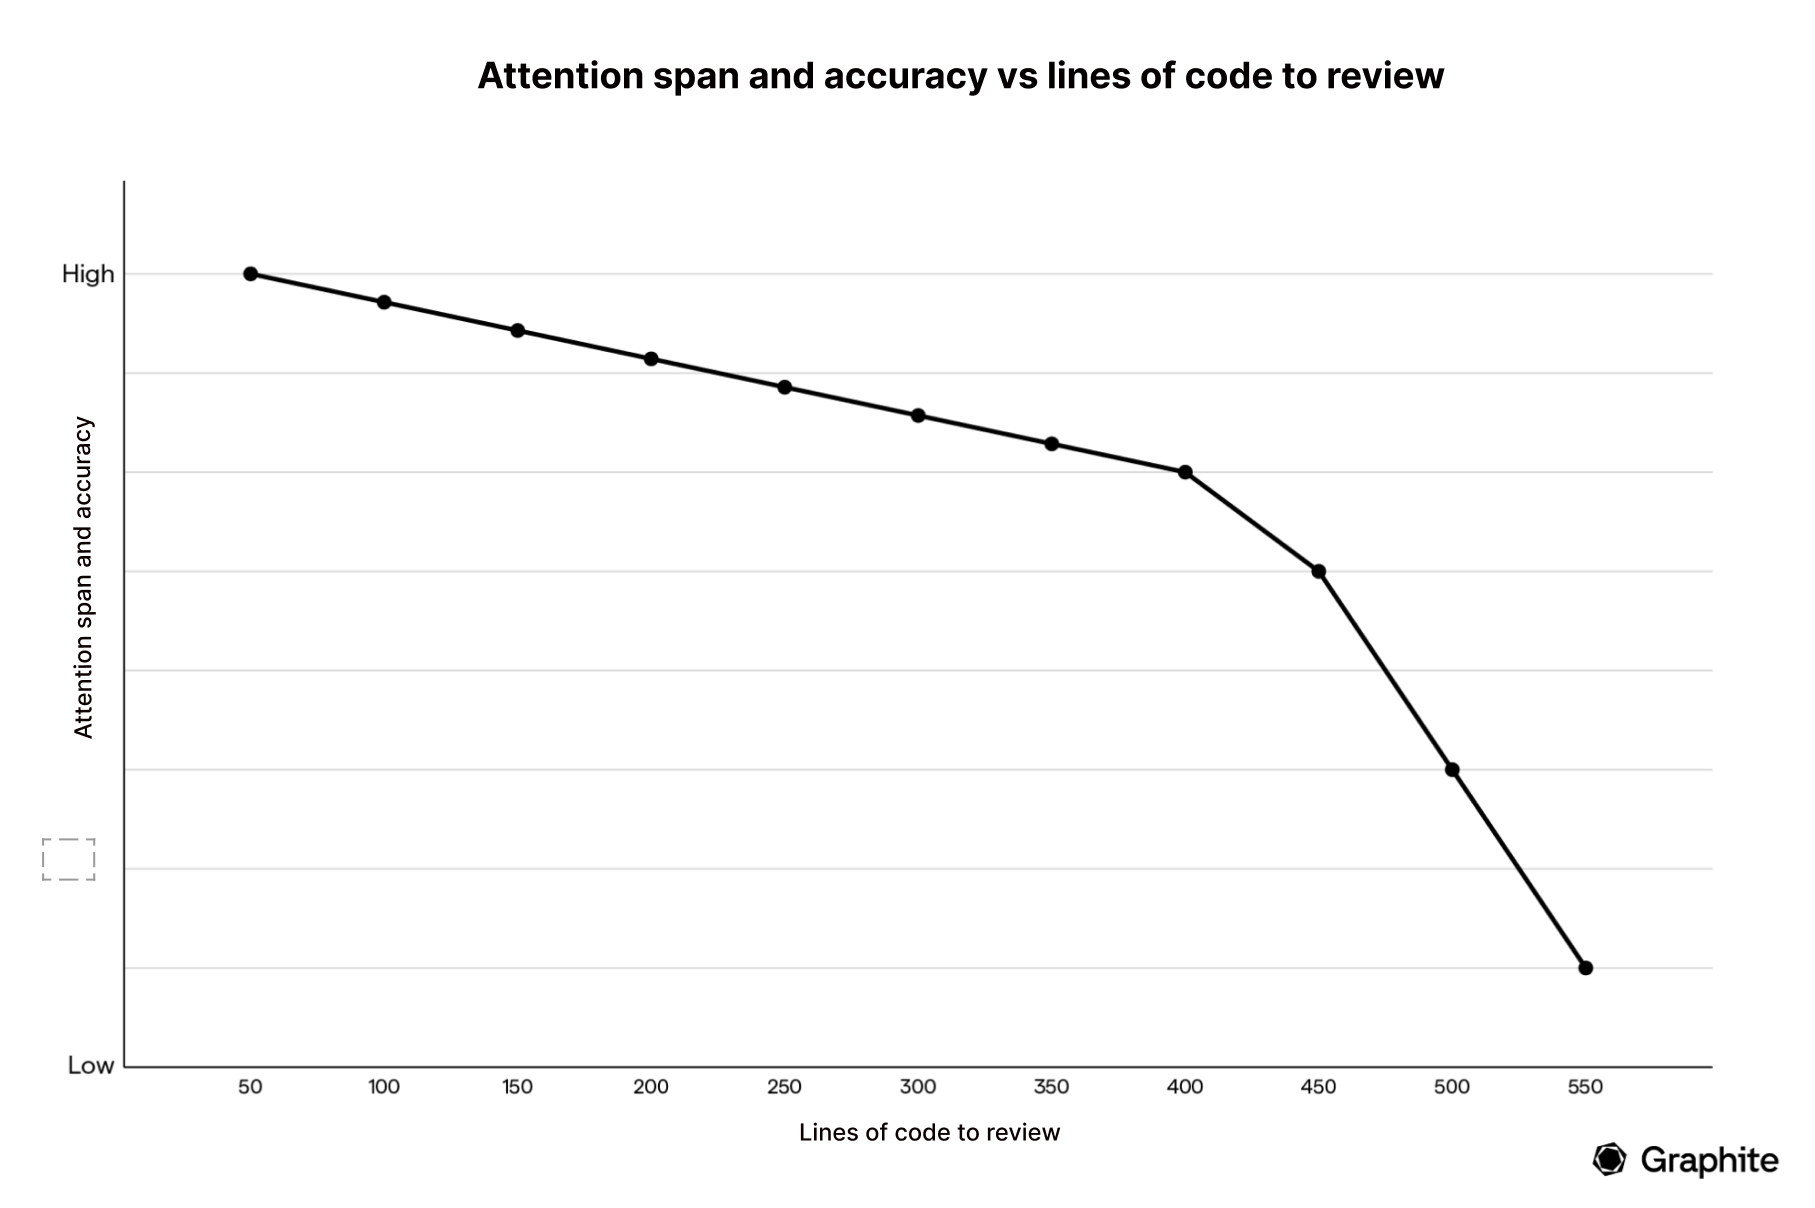 graph of attention span and accuracy vs lines of code to review